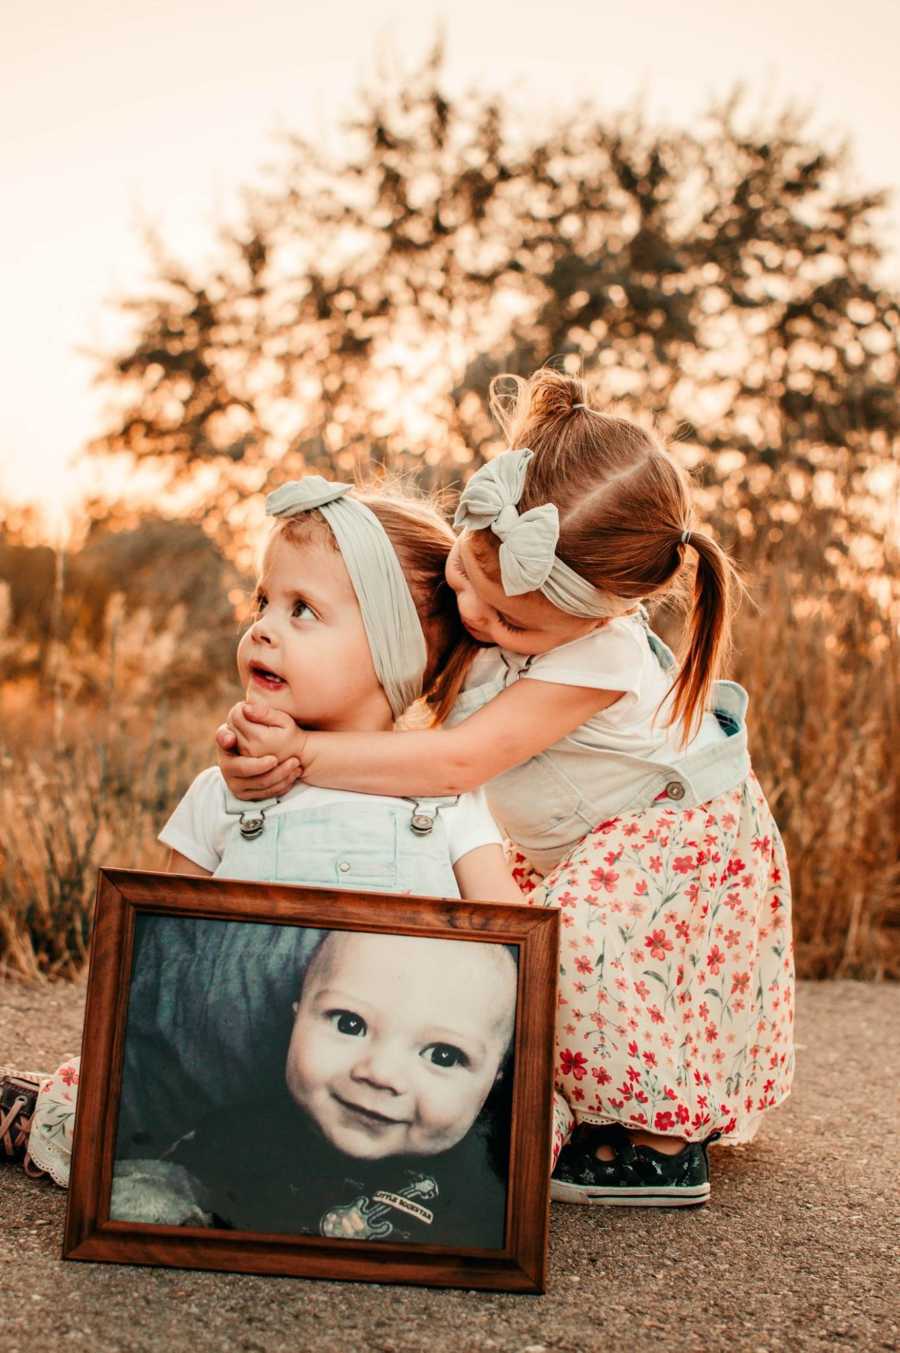 Picture frame of deceased 8 year old with his older sisters hugging behind it